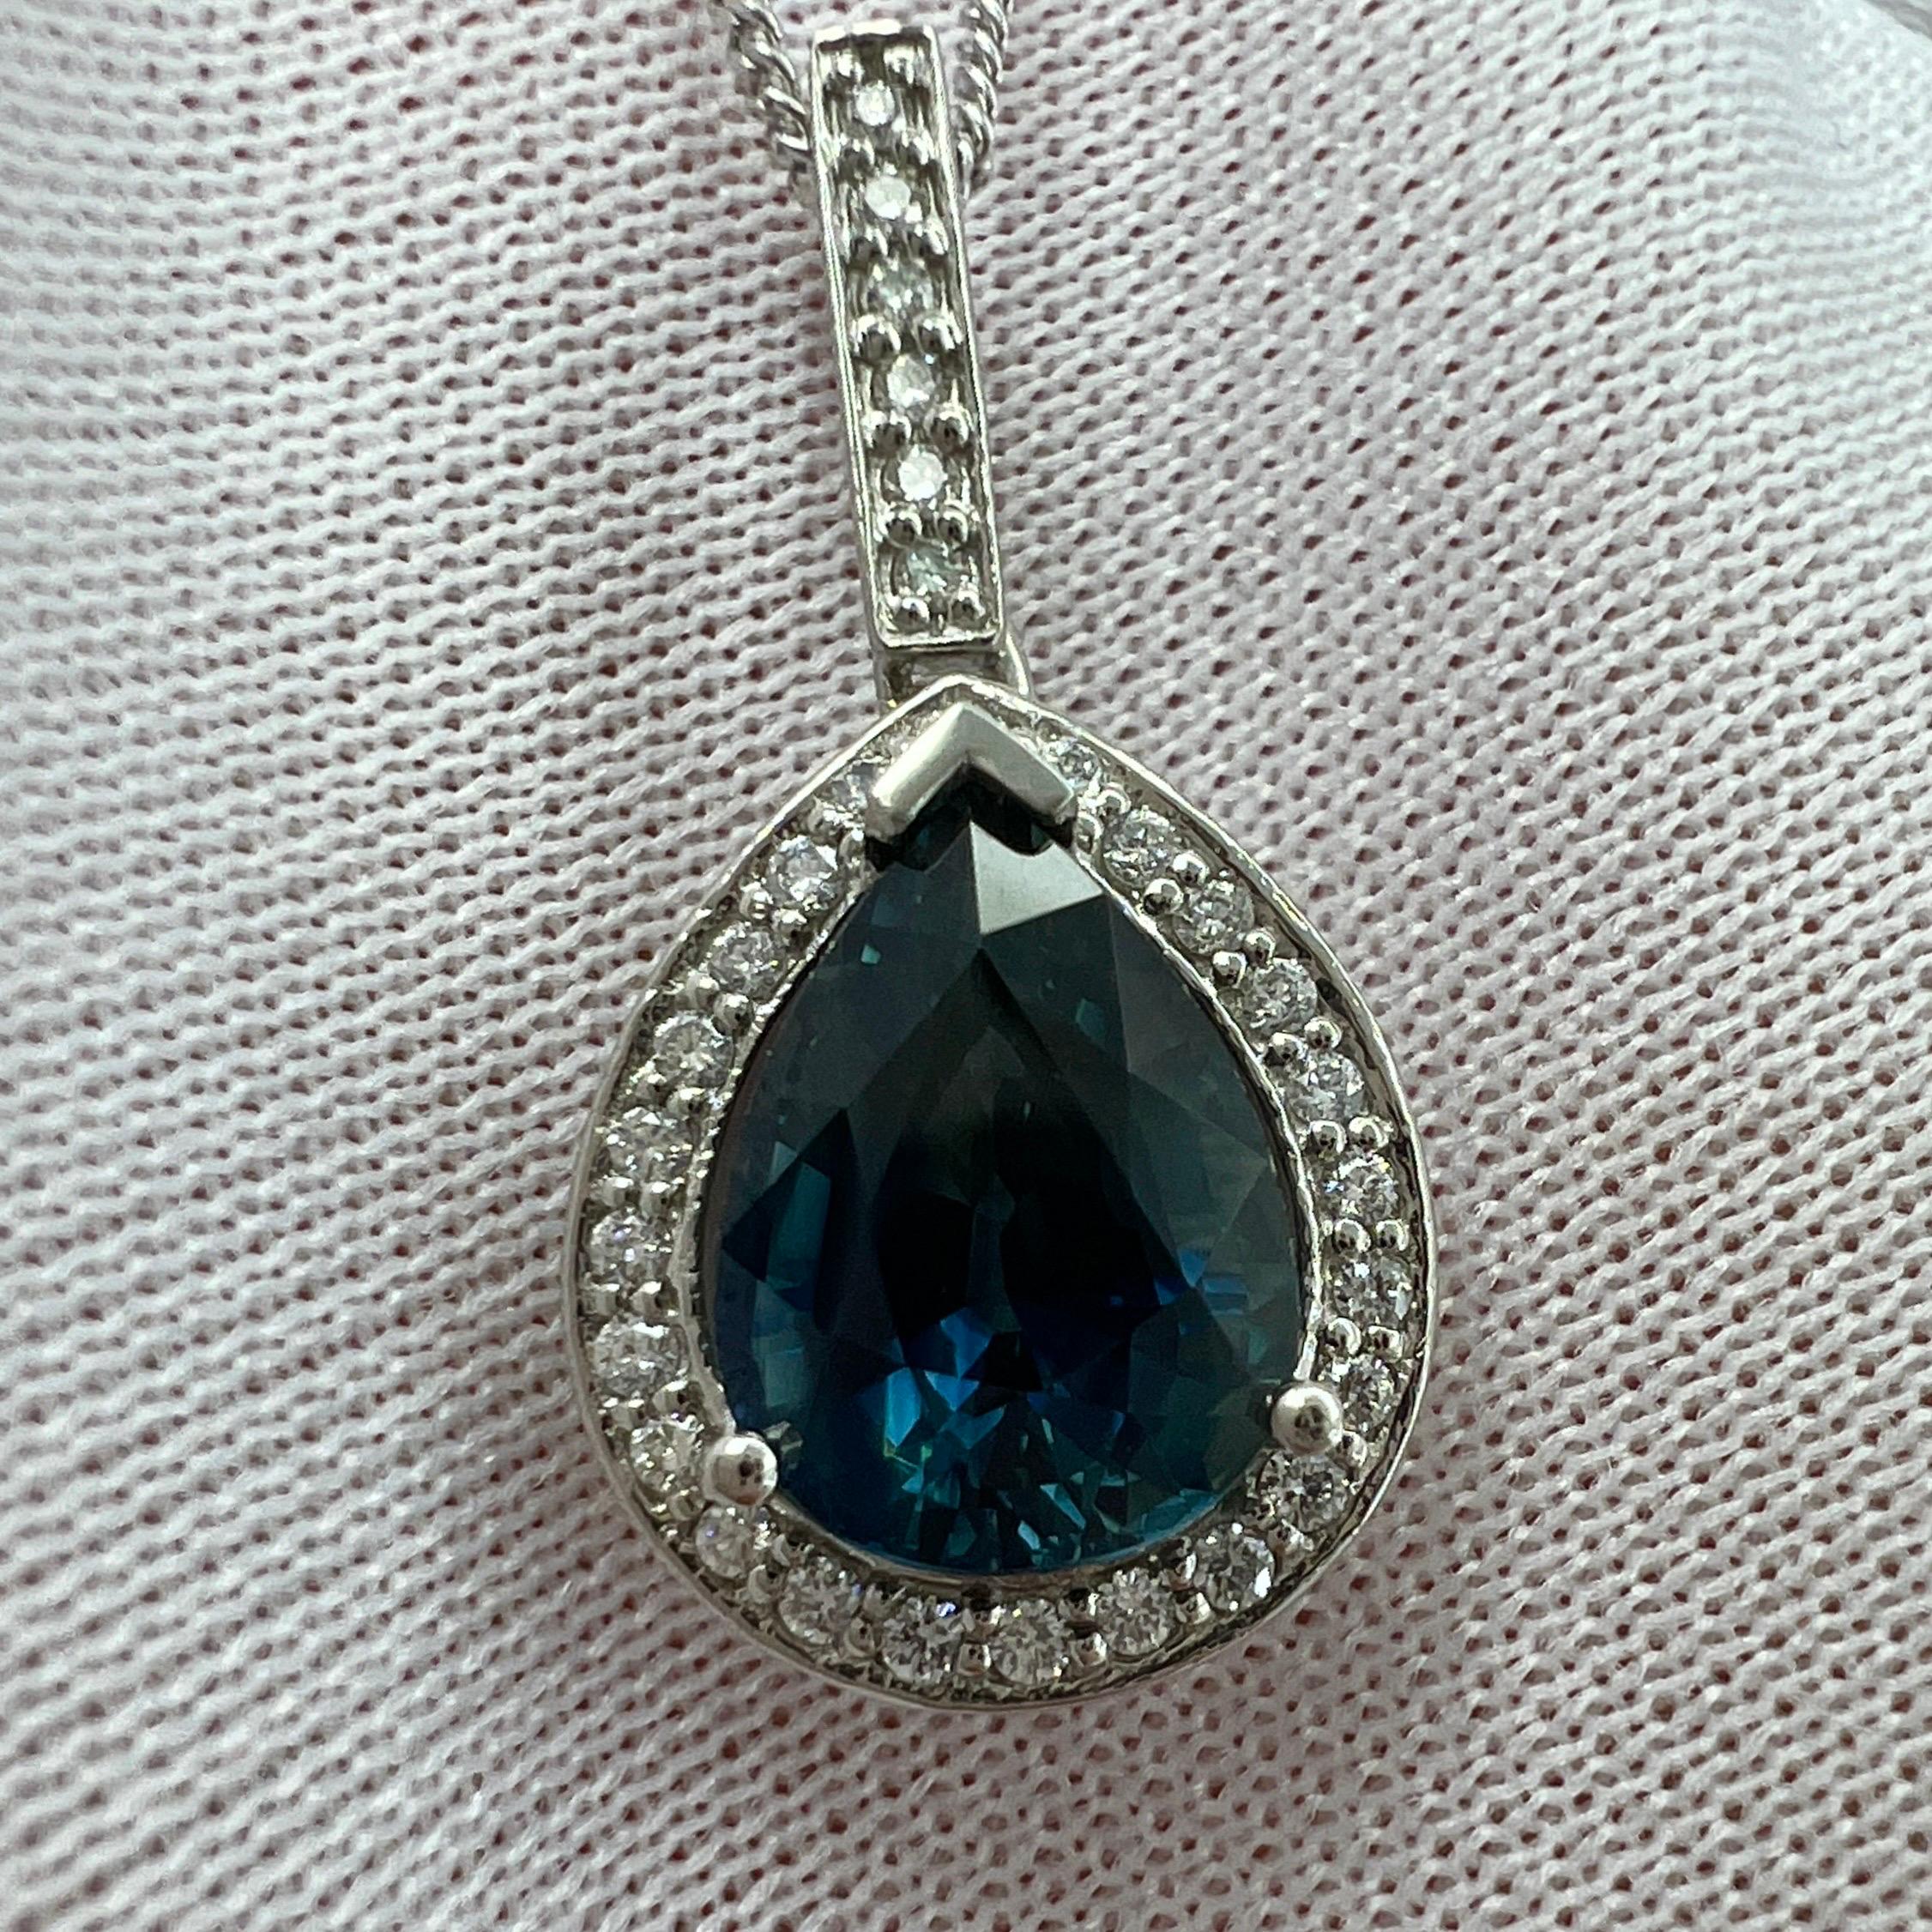 Fine Australian Green Blue Sapphire & Diamond Platinum Halo Pendant Necklace.

2.53 Carat pear cut sapphire with a stunning vivid green blue teal colour and excellent clarity. A very clean stone, VVS.
Ethically sourced Australian stone.

This